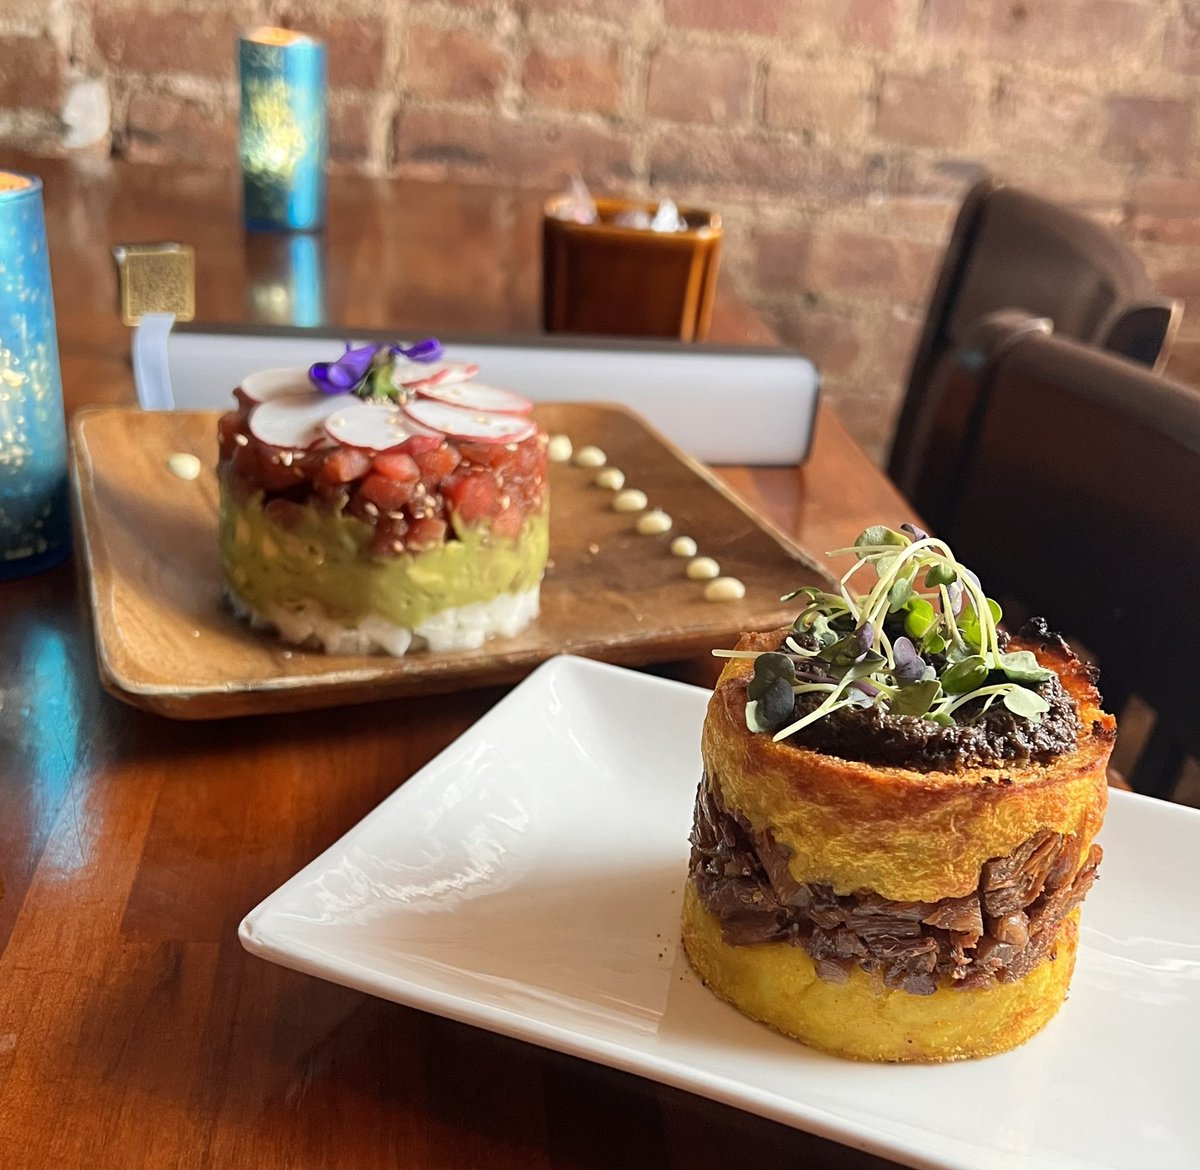 Our delicious food is ready for you, reserve via Resy or call us! 
#frenchie #excusemyfrench #goodfood #bestfood #eatingtime #greatfood #happytummy #freshfood #frenchfood #deliciousfood #delicious #delicious_food #bestrestaurants #nycfood #nyceats #nycfood #eatfamous #nycfoods